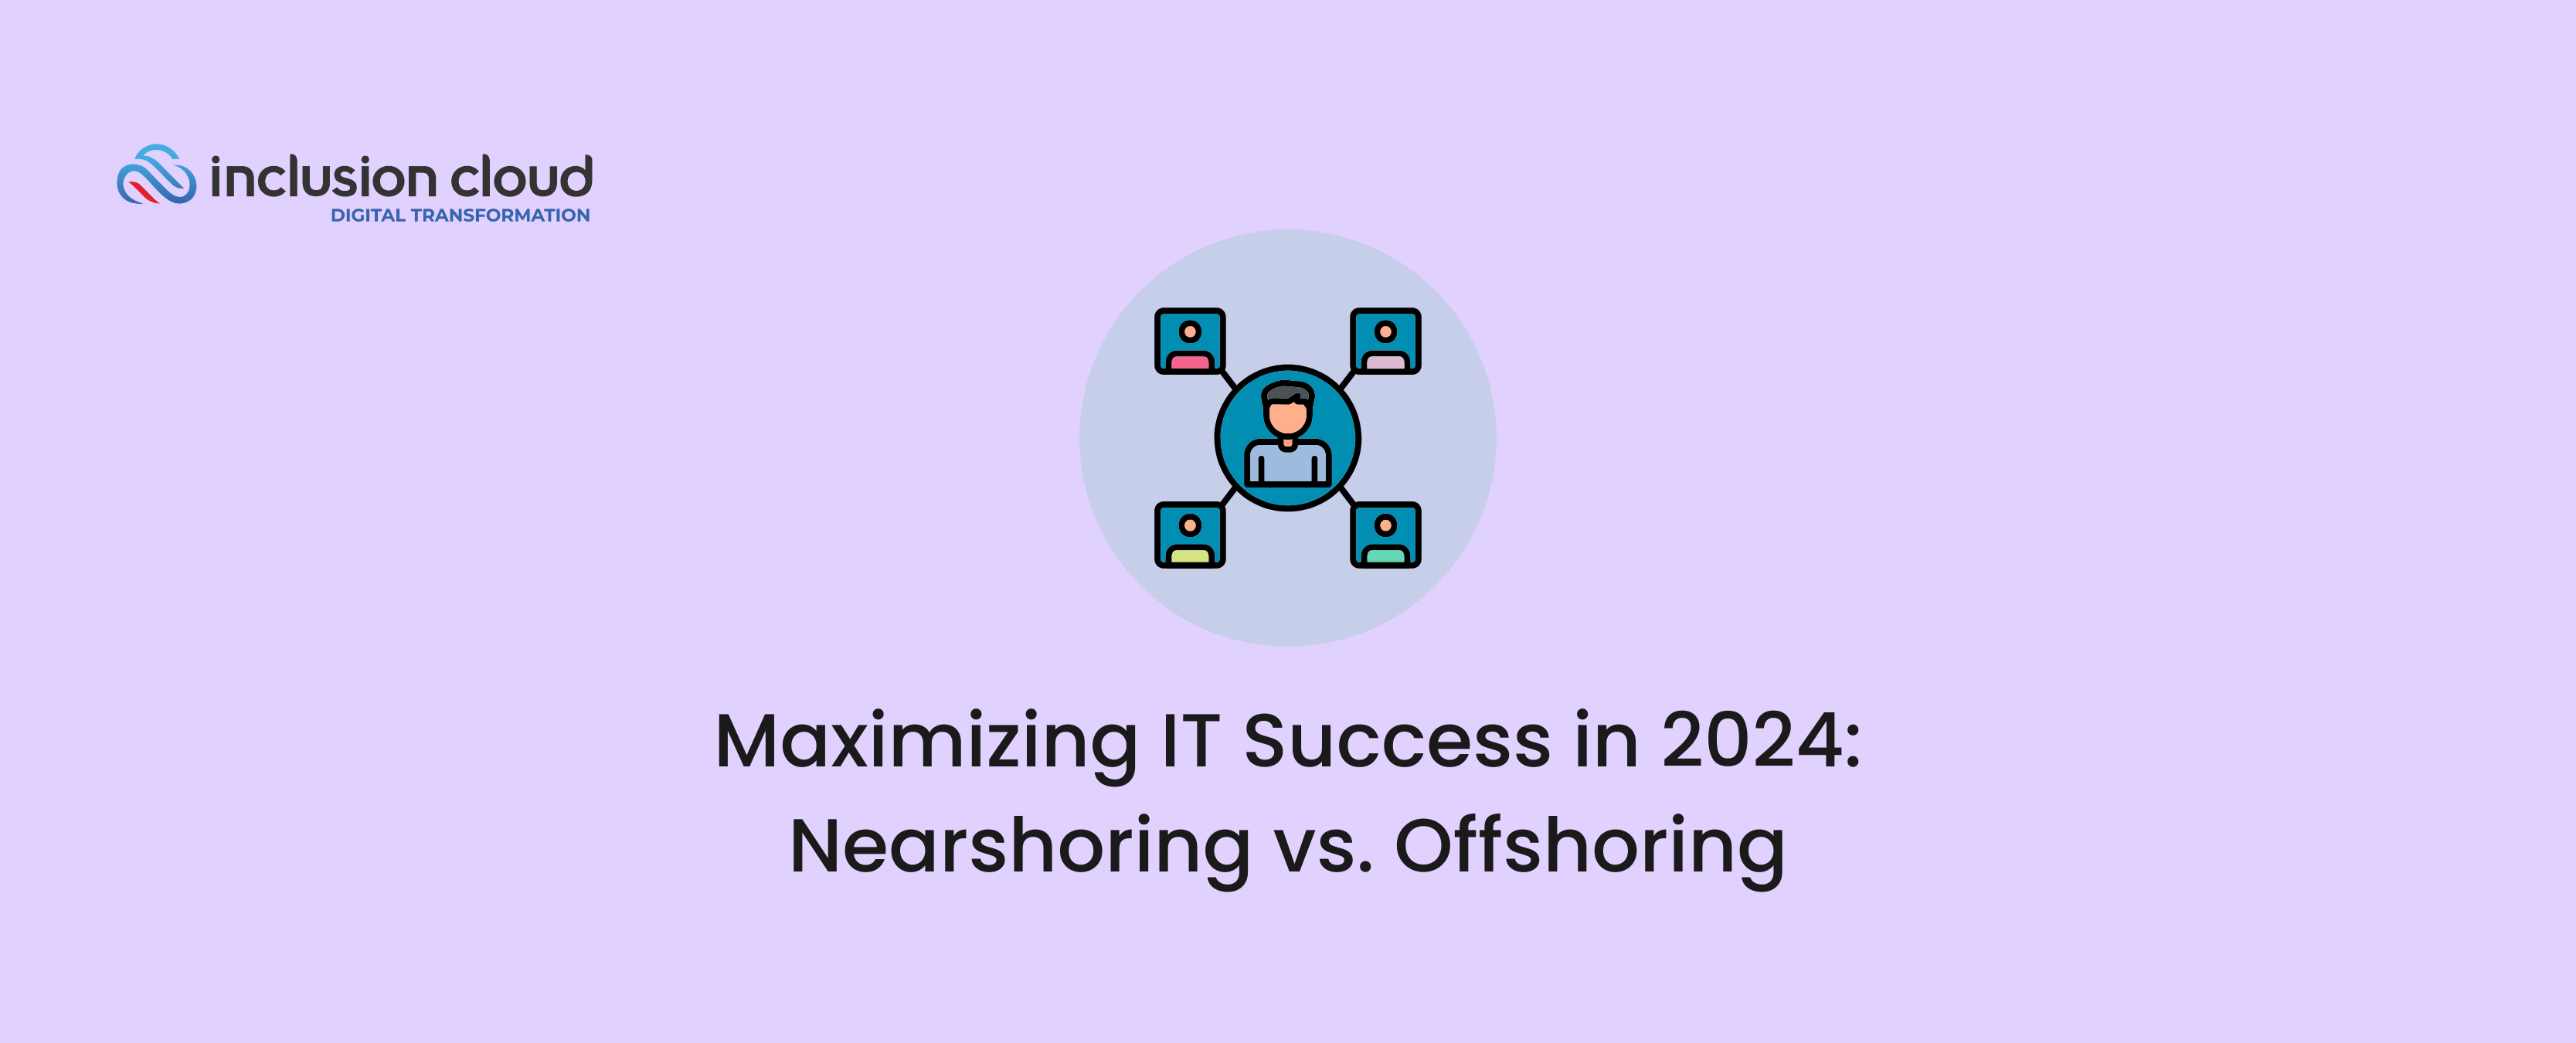 Maximizing IT Success in 2024 Nearshoring vs. Offshoring